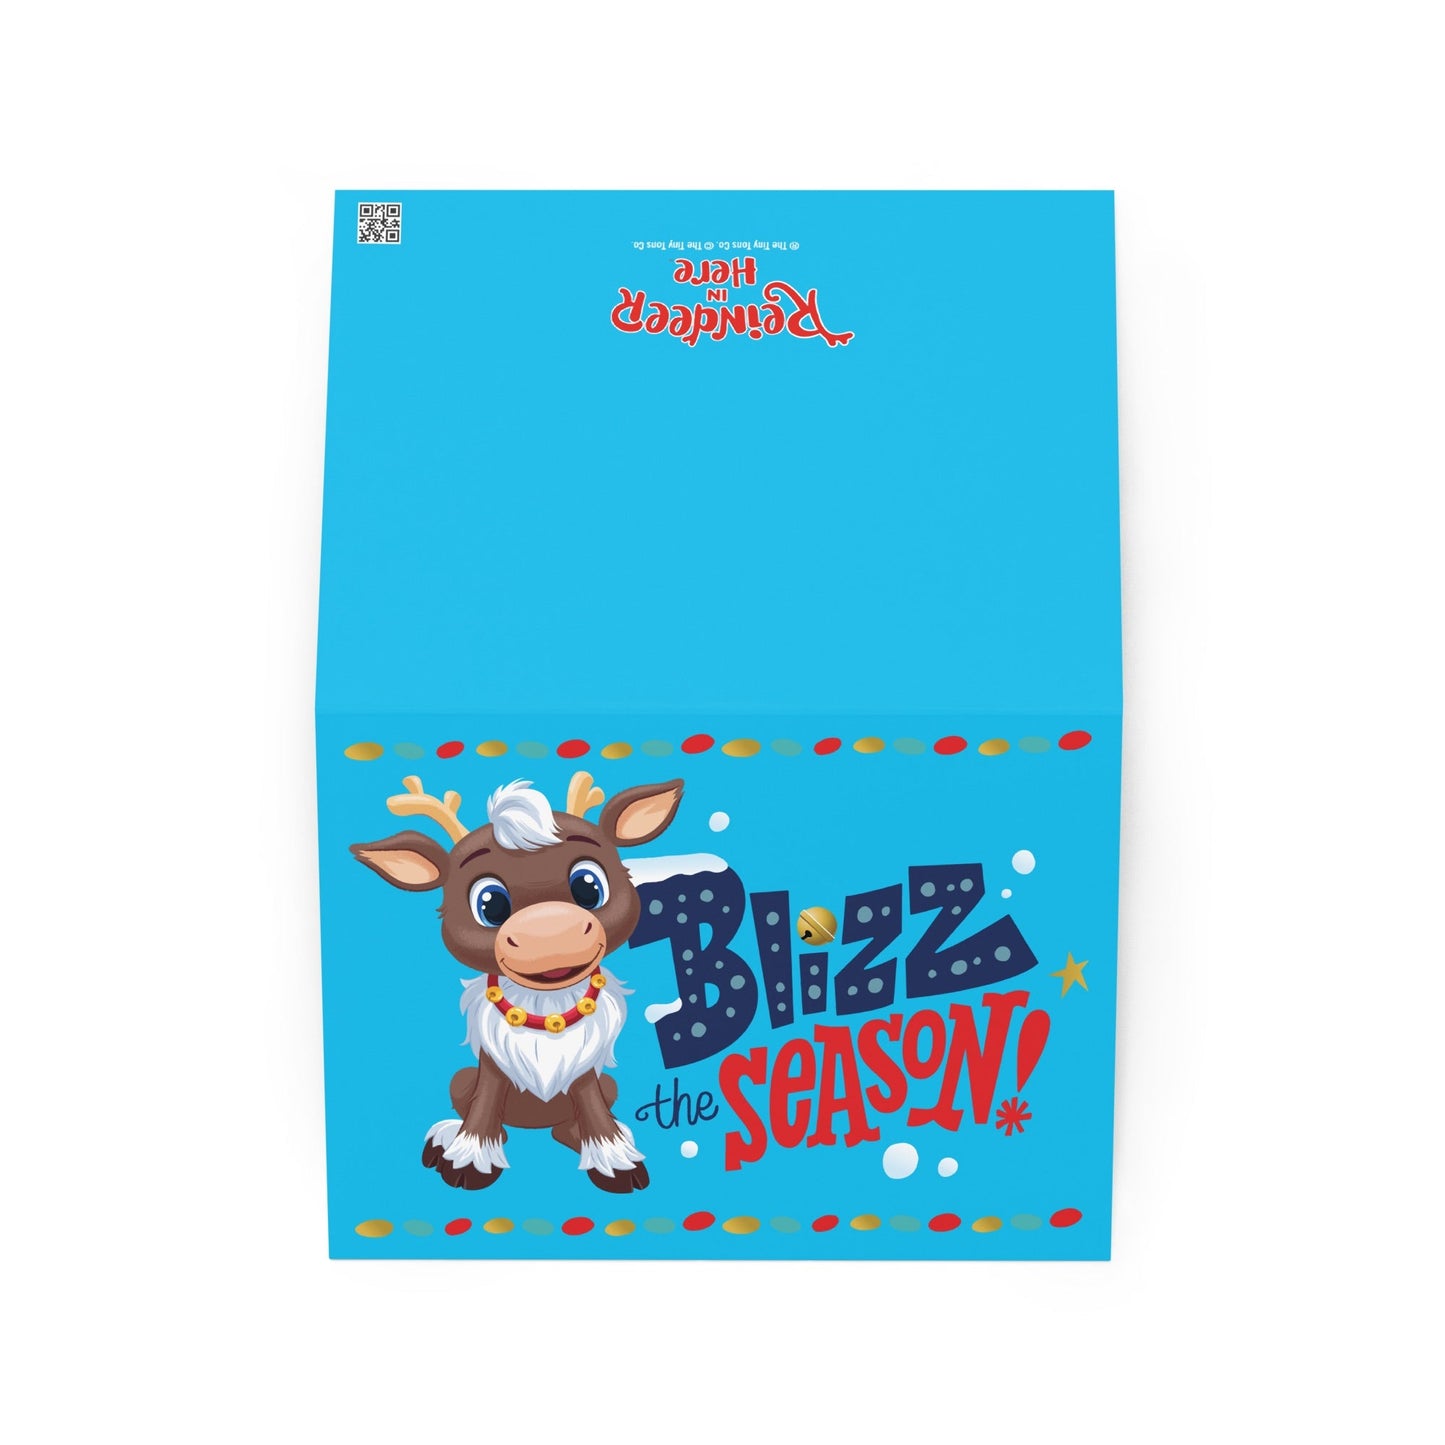 Reindeer in Here Blizz the Season Holiday Card - Paramount Shop